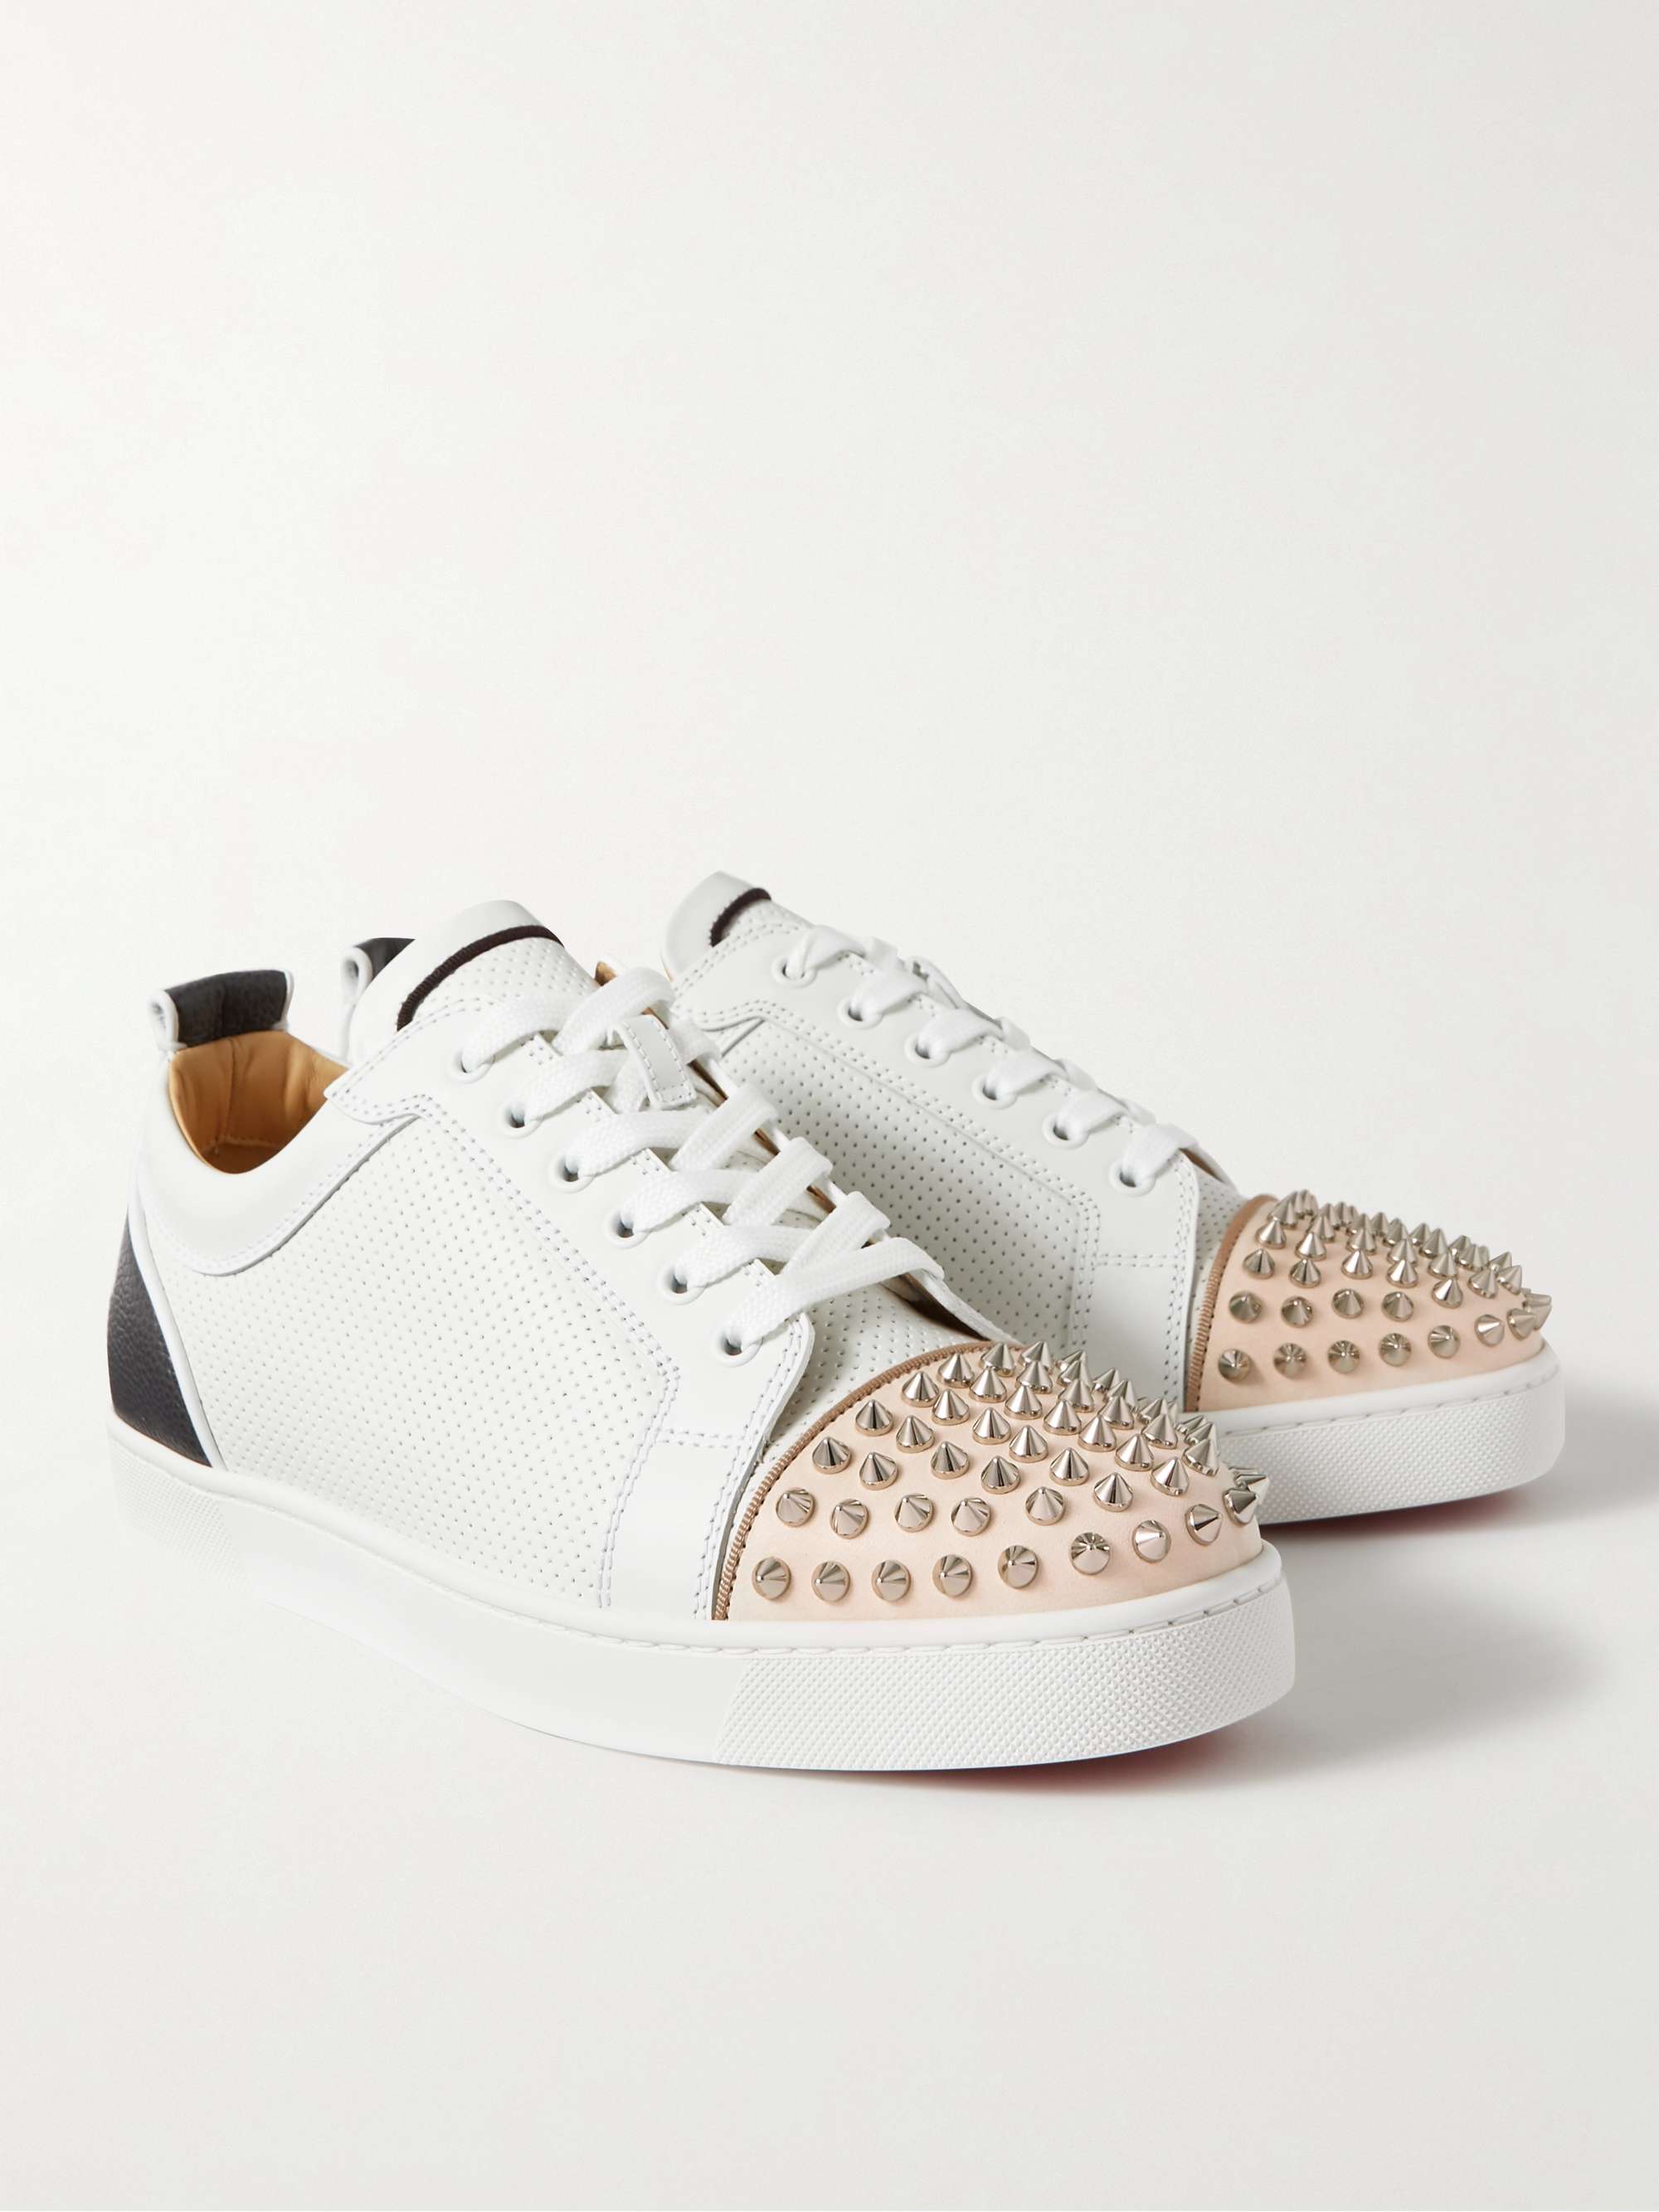 Christian Louboutin - Louis Junior Spikes Cap-Toe Leather Sneakers